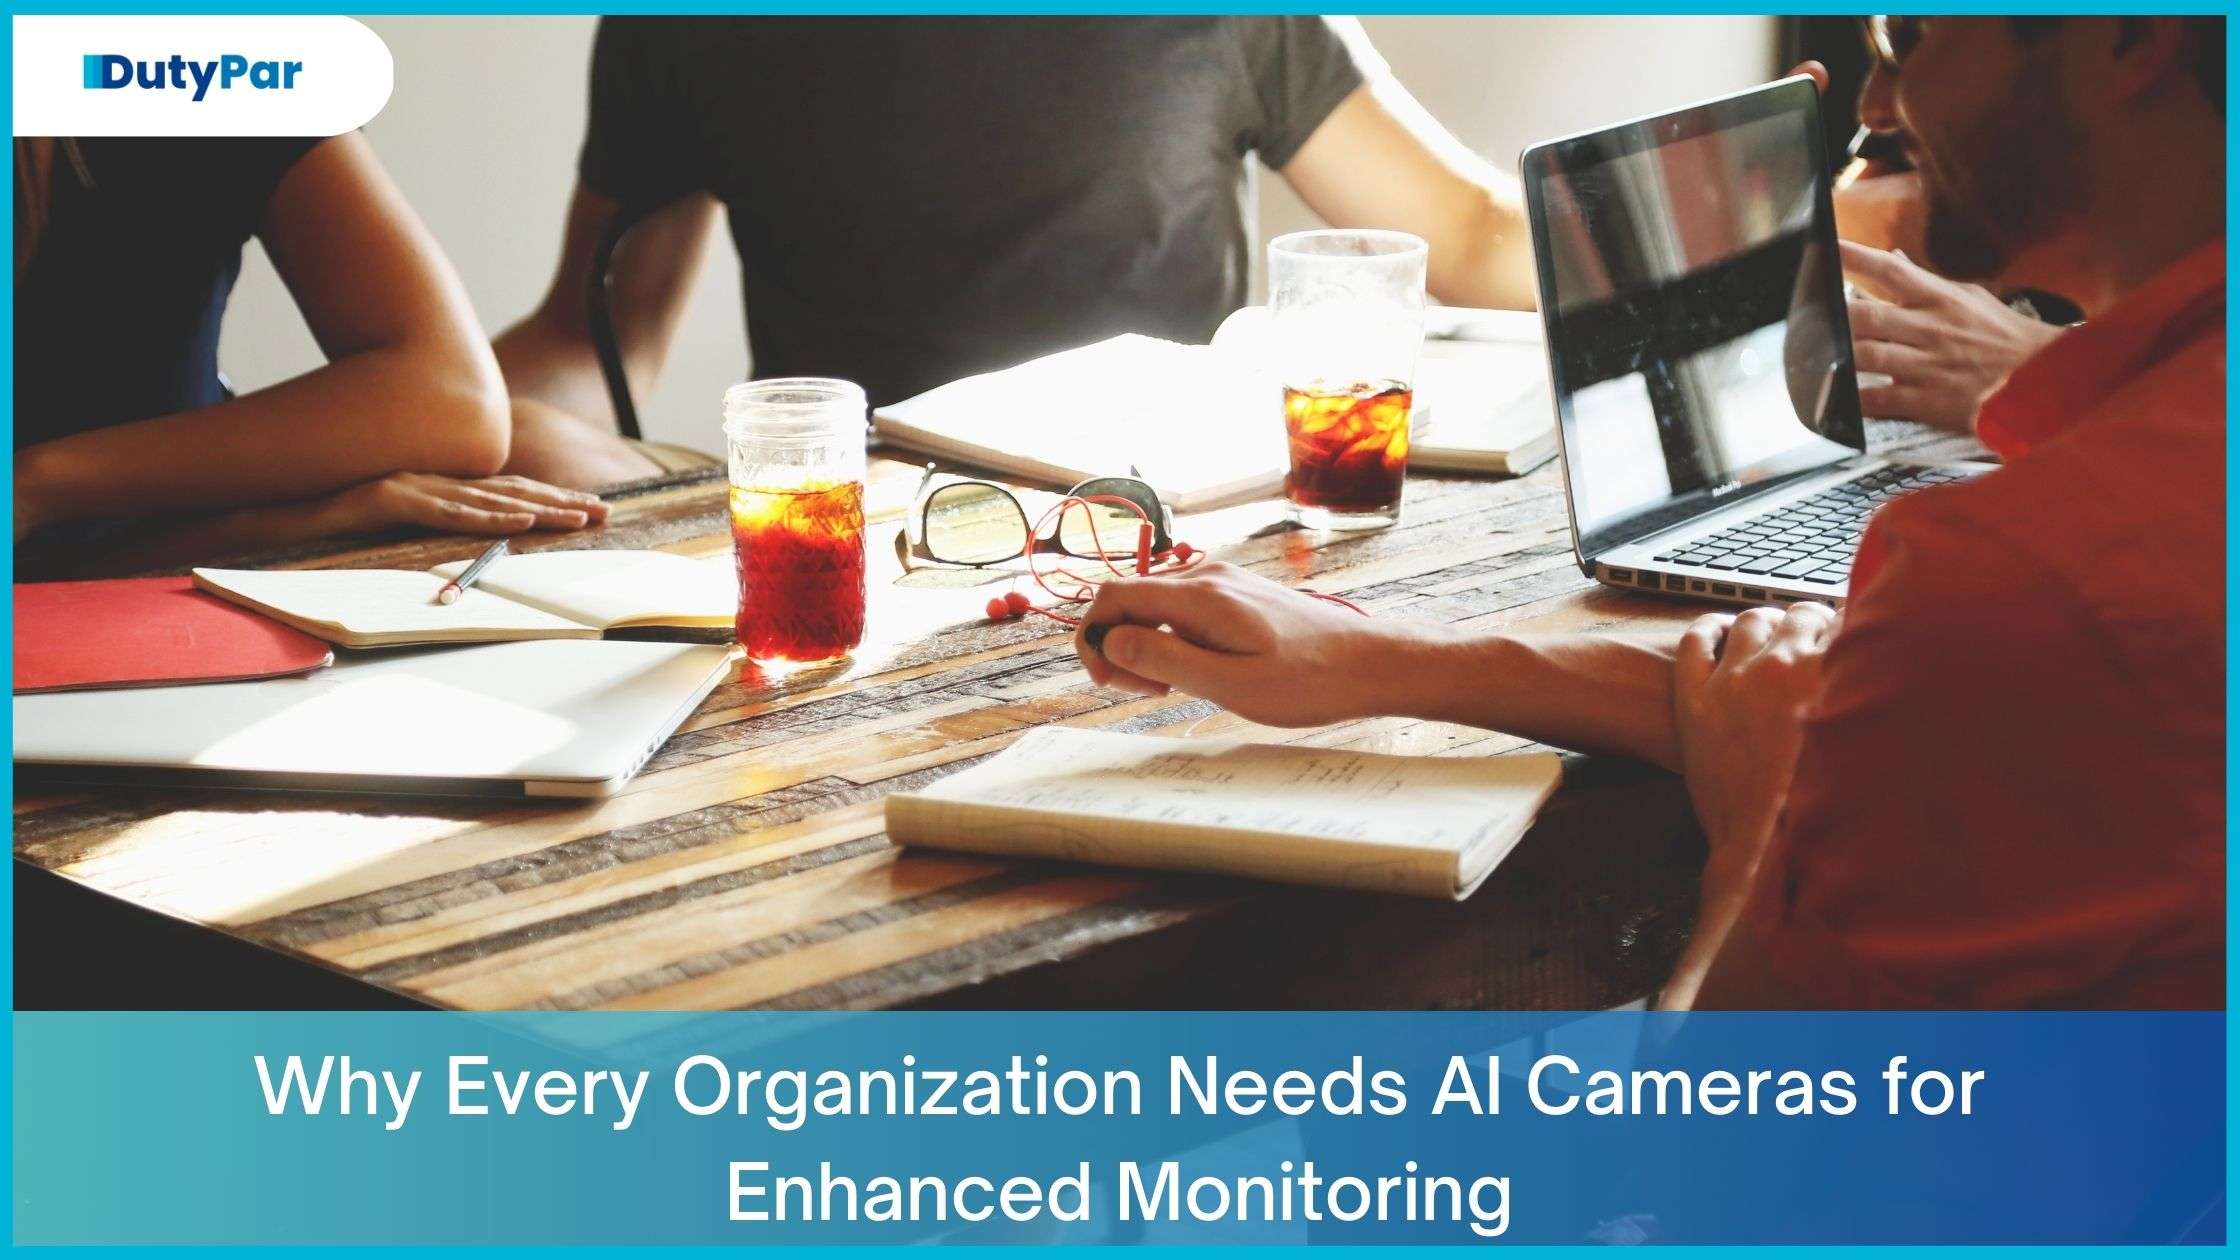 Why Every Organization Needs AI Cameras for Enhanced Monitoring